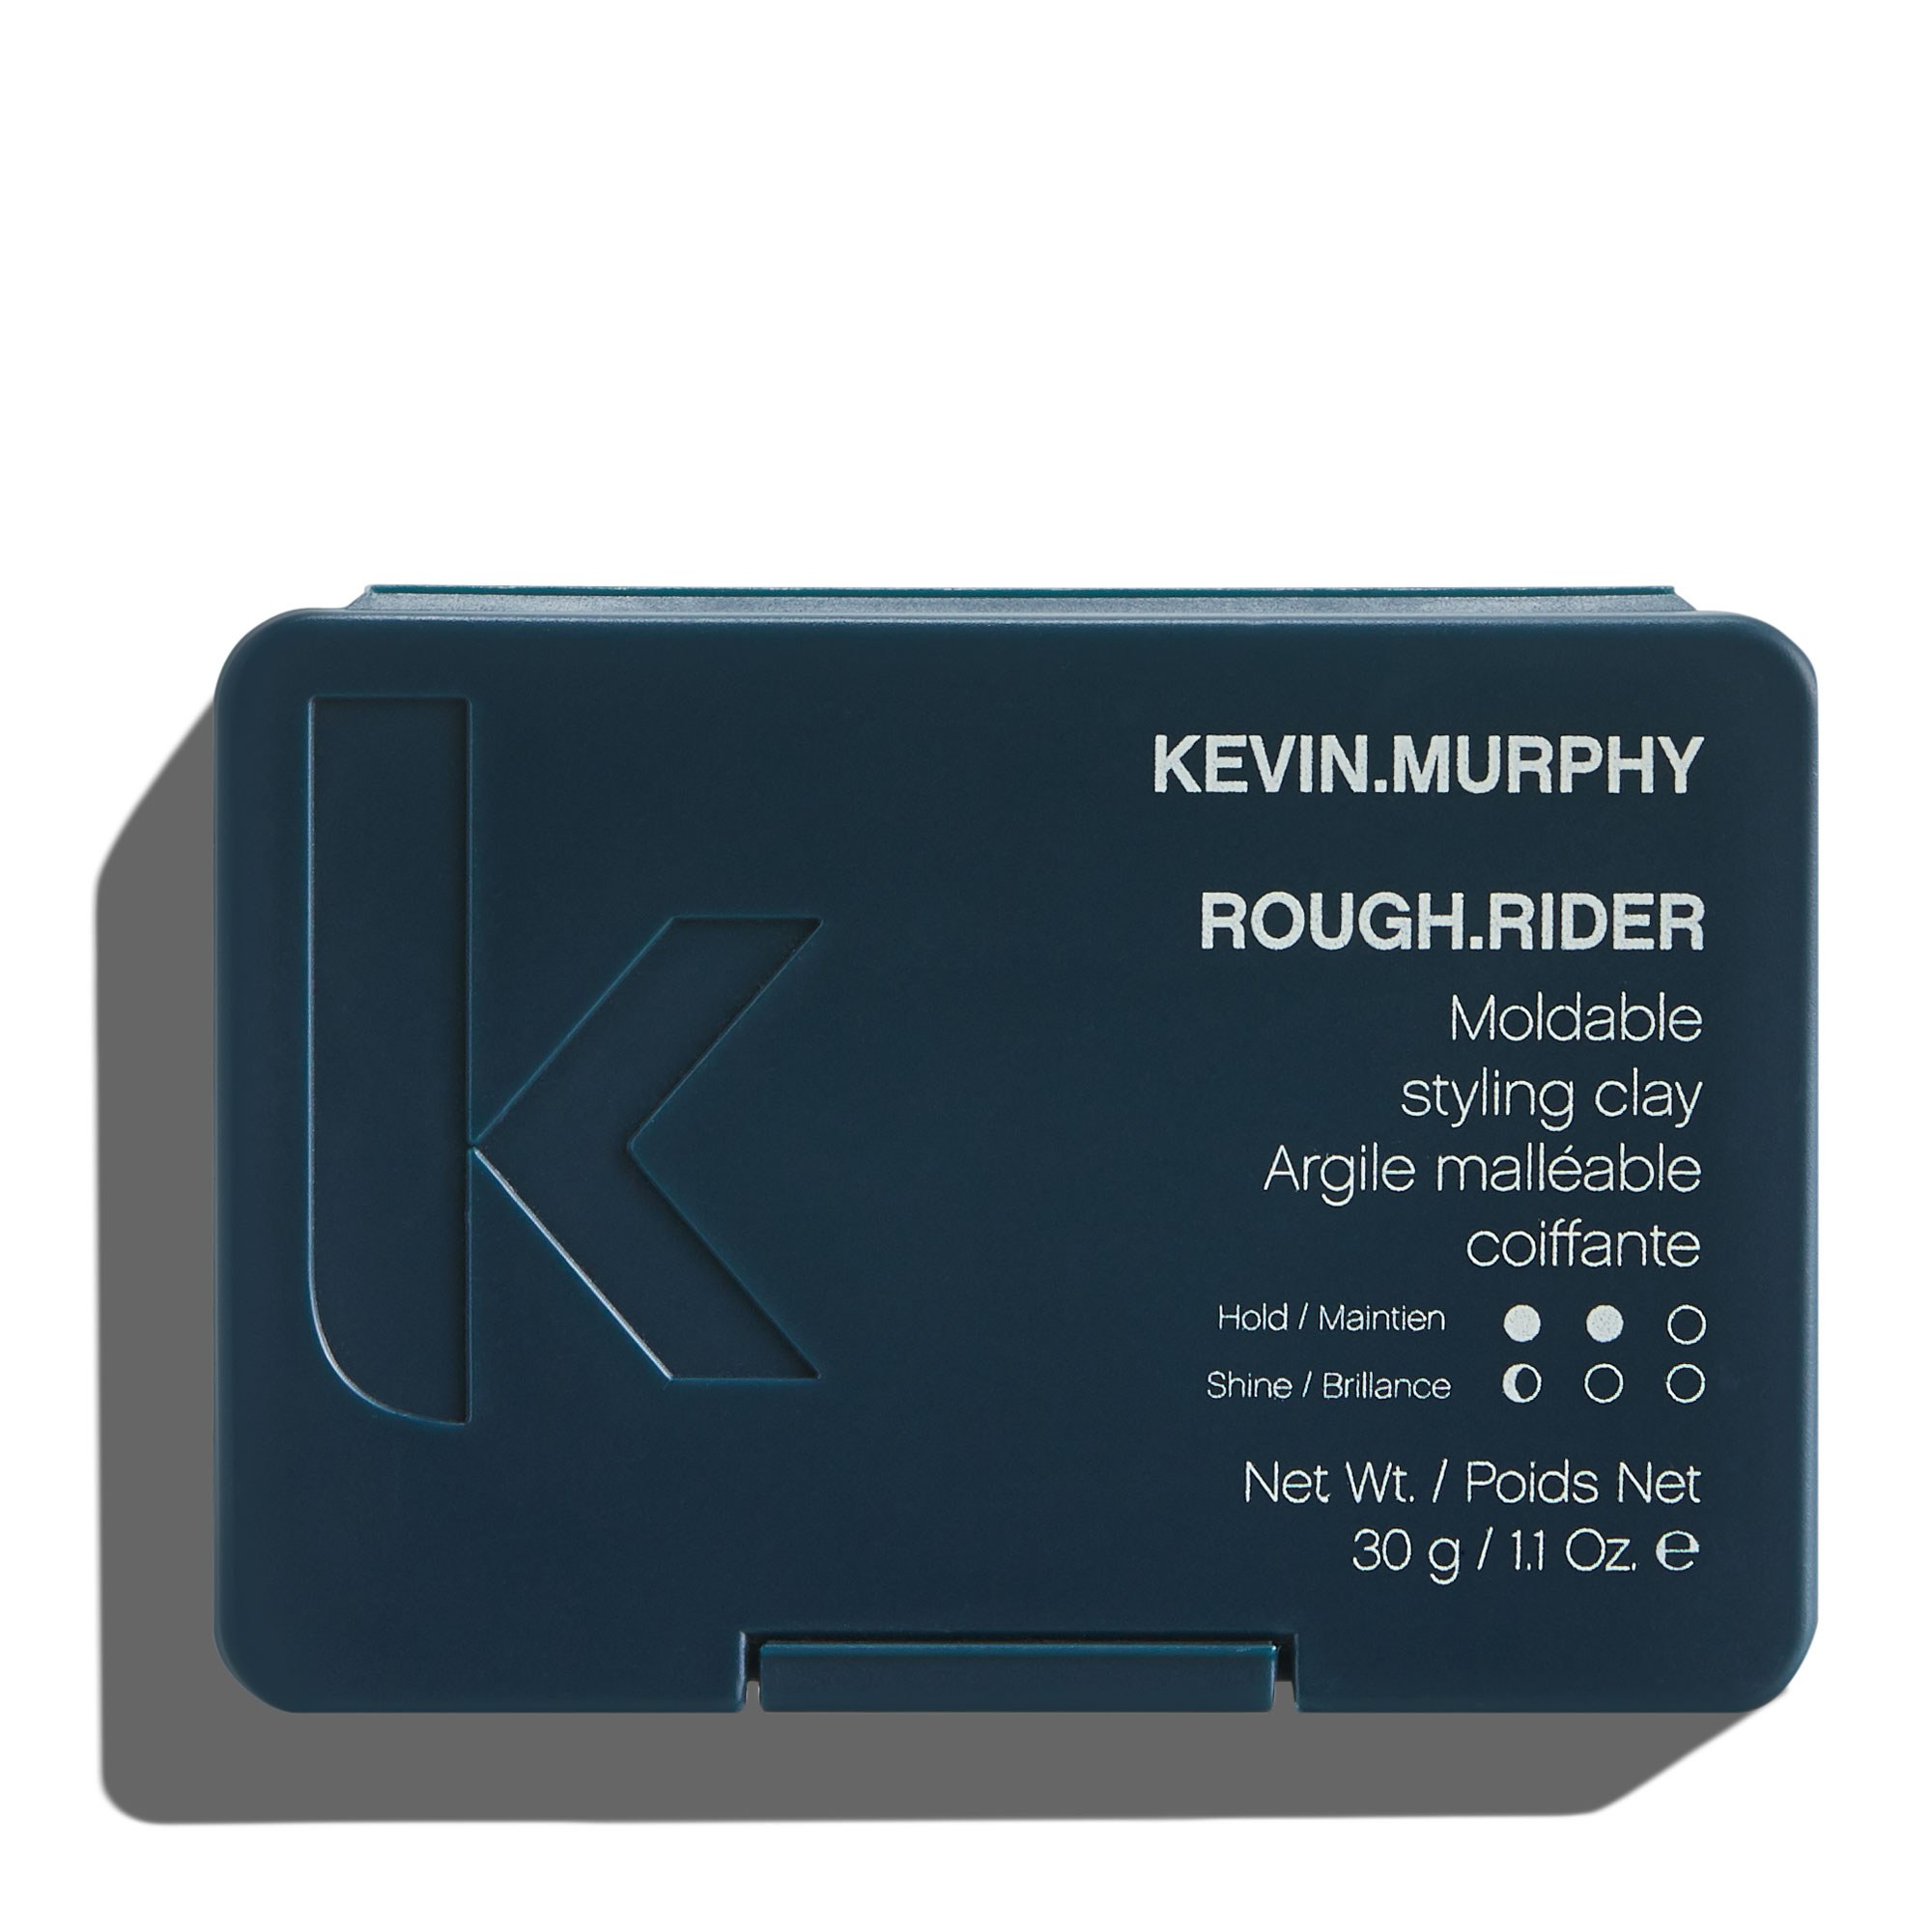 KEVIN.MURPHY For Men: ROUGH.RIDER